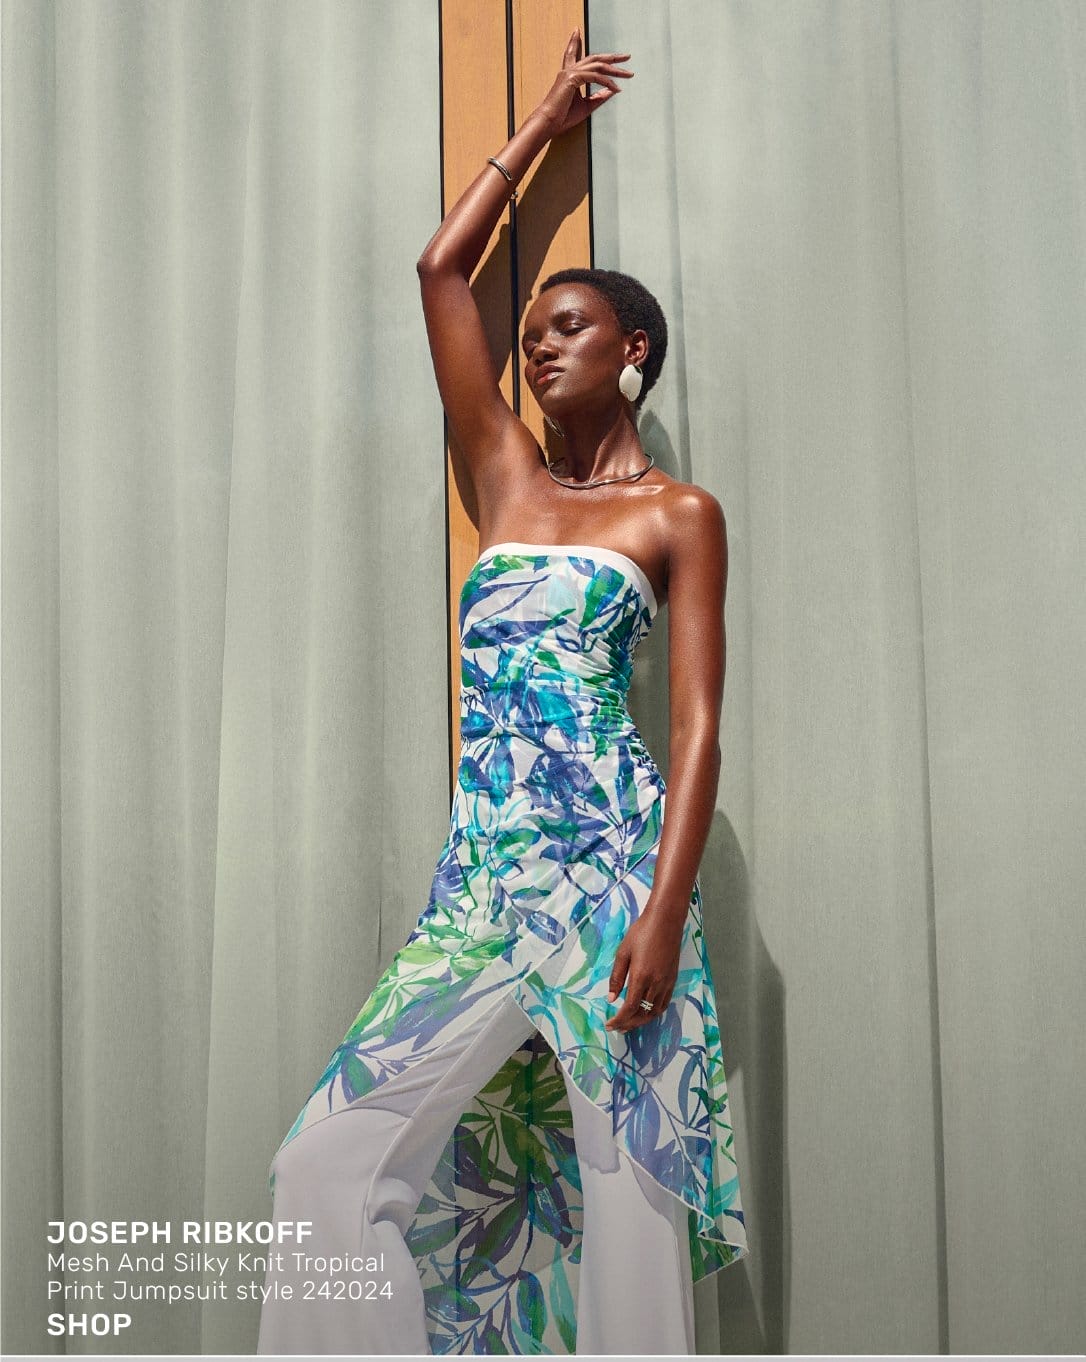 Mesh And Silky Knit Tropical Print Jumpsuit Style 242024